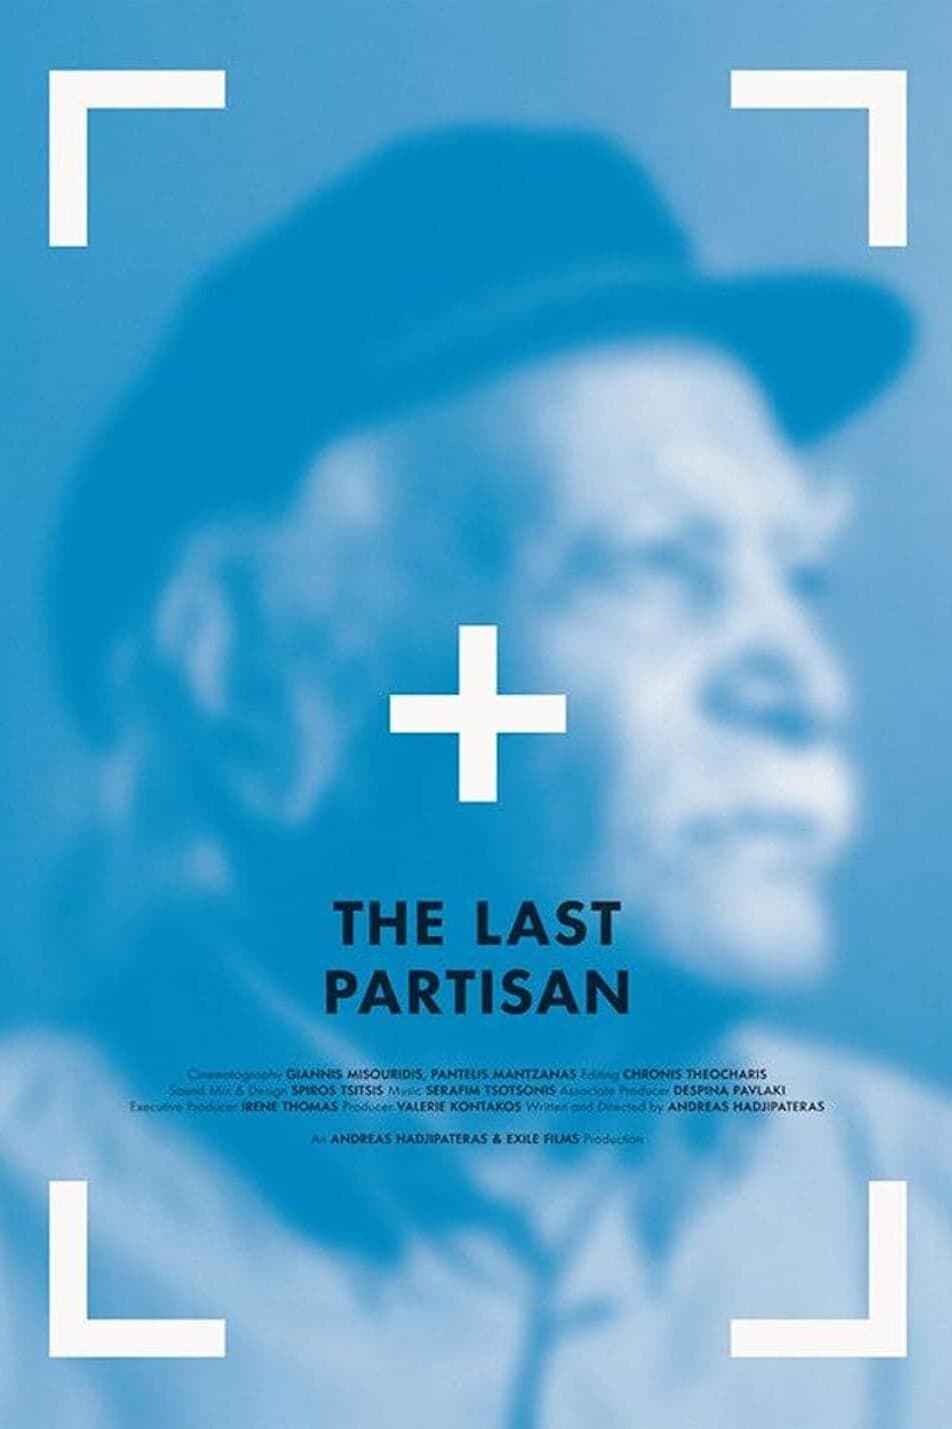 The Last Partisan